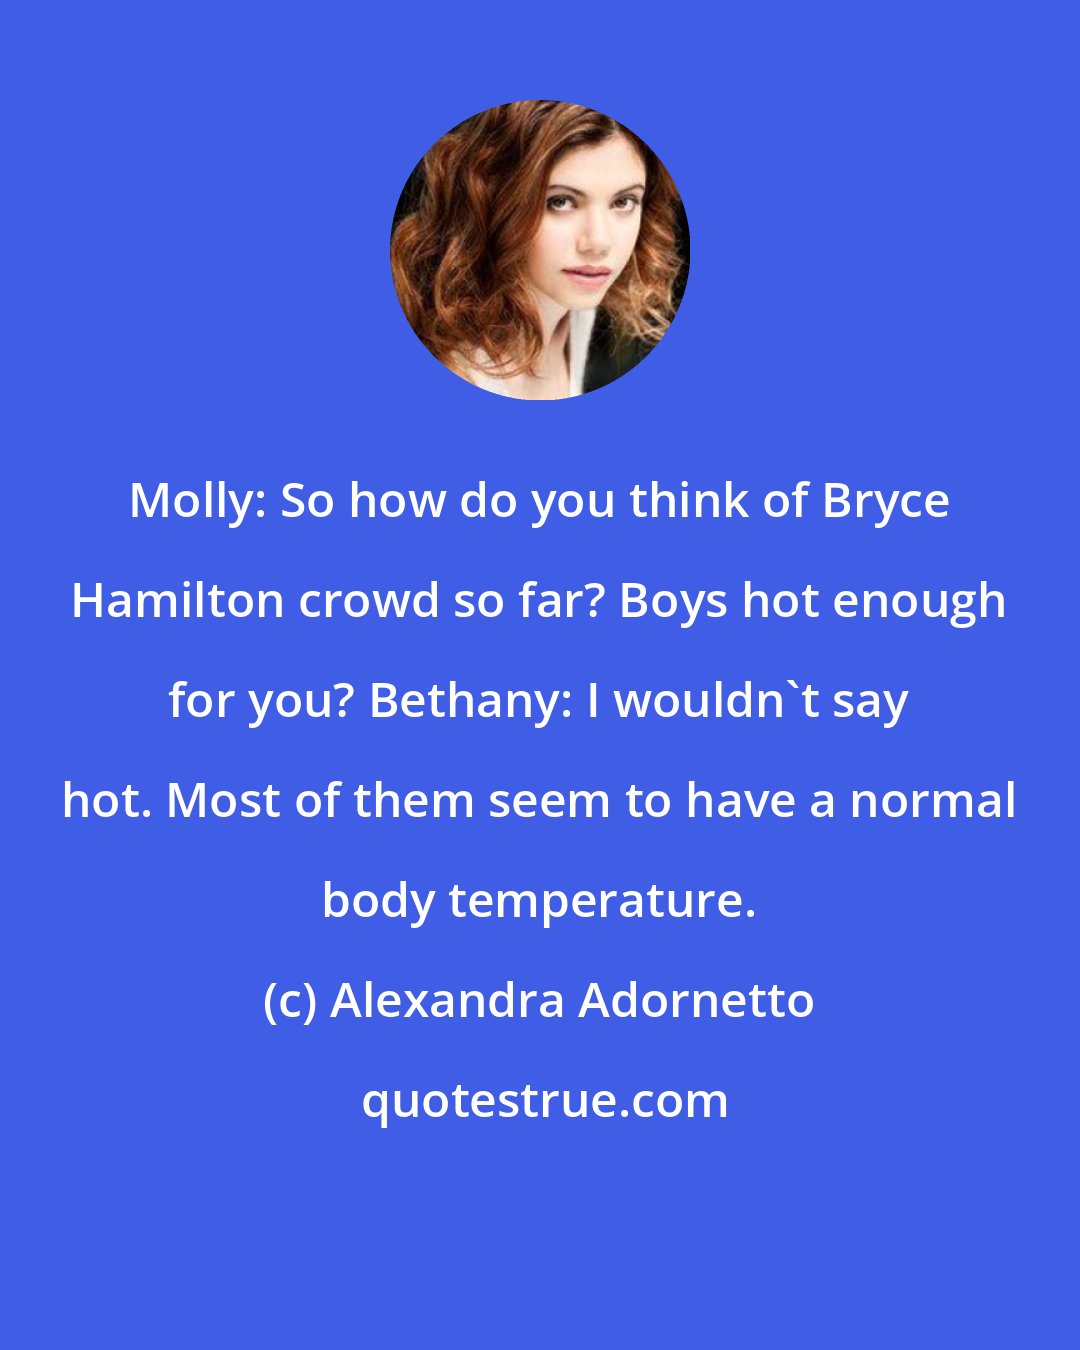 Alexandra Adornetto: Molly: So how do you think of Bryce Hamilton crowd so far? Boys hot enough for you? Bethany: I wouldn't say hot. Most of them seem to have a normal body temperature.